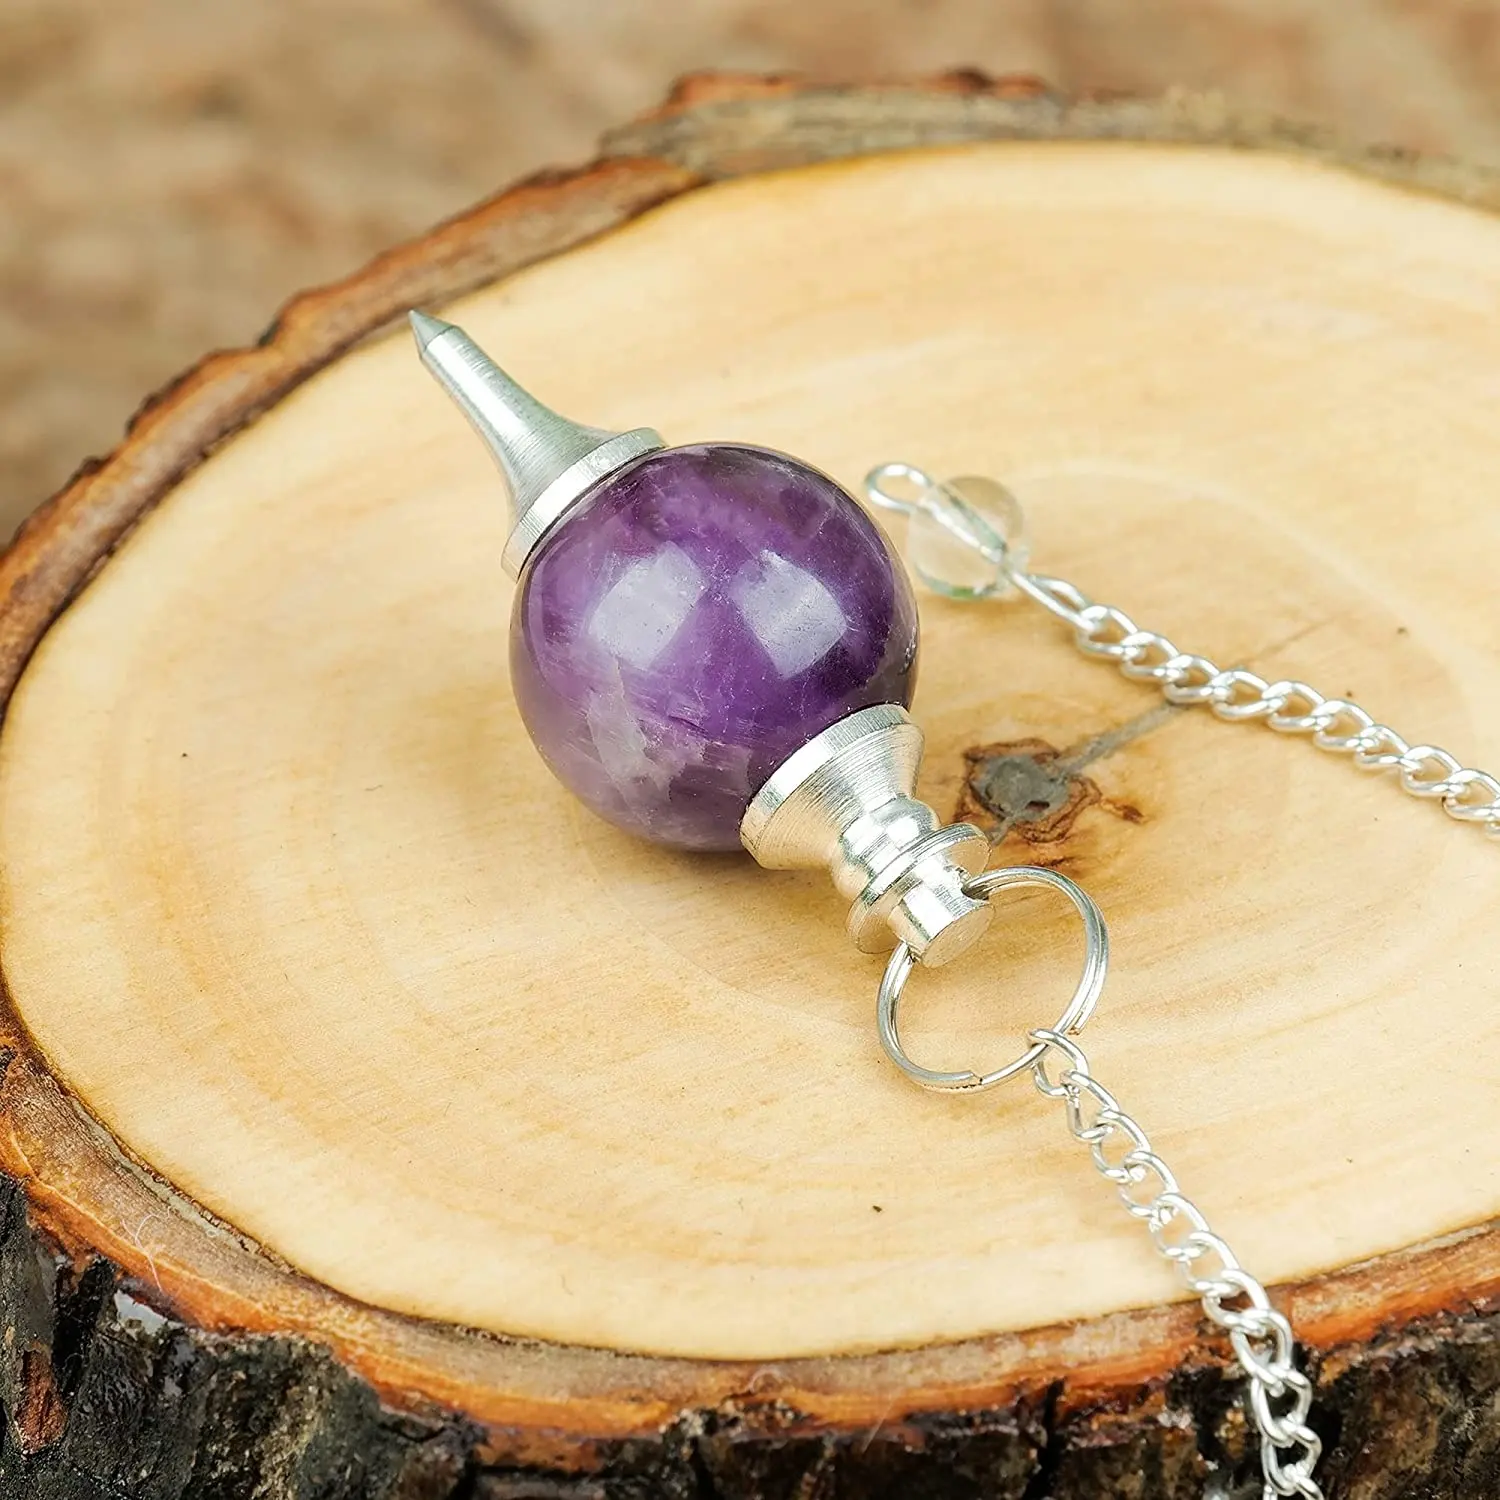 Latest Amethyst Ball Pendulum For Sale Wholesale Amethyst Stone Pendulums For Dowsing Gemstone Pendulum Metaphysical new age